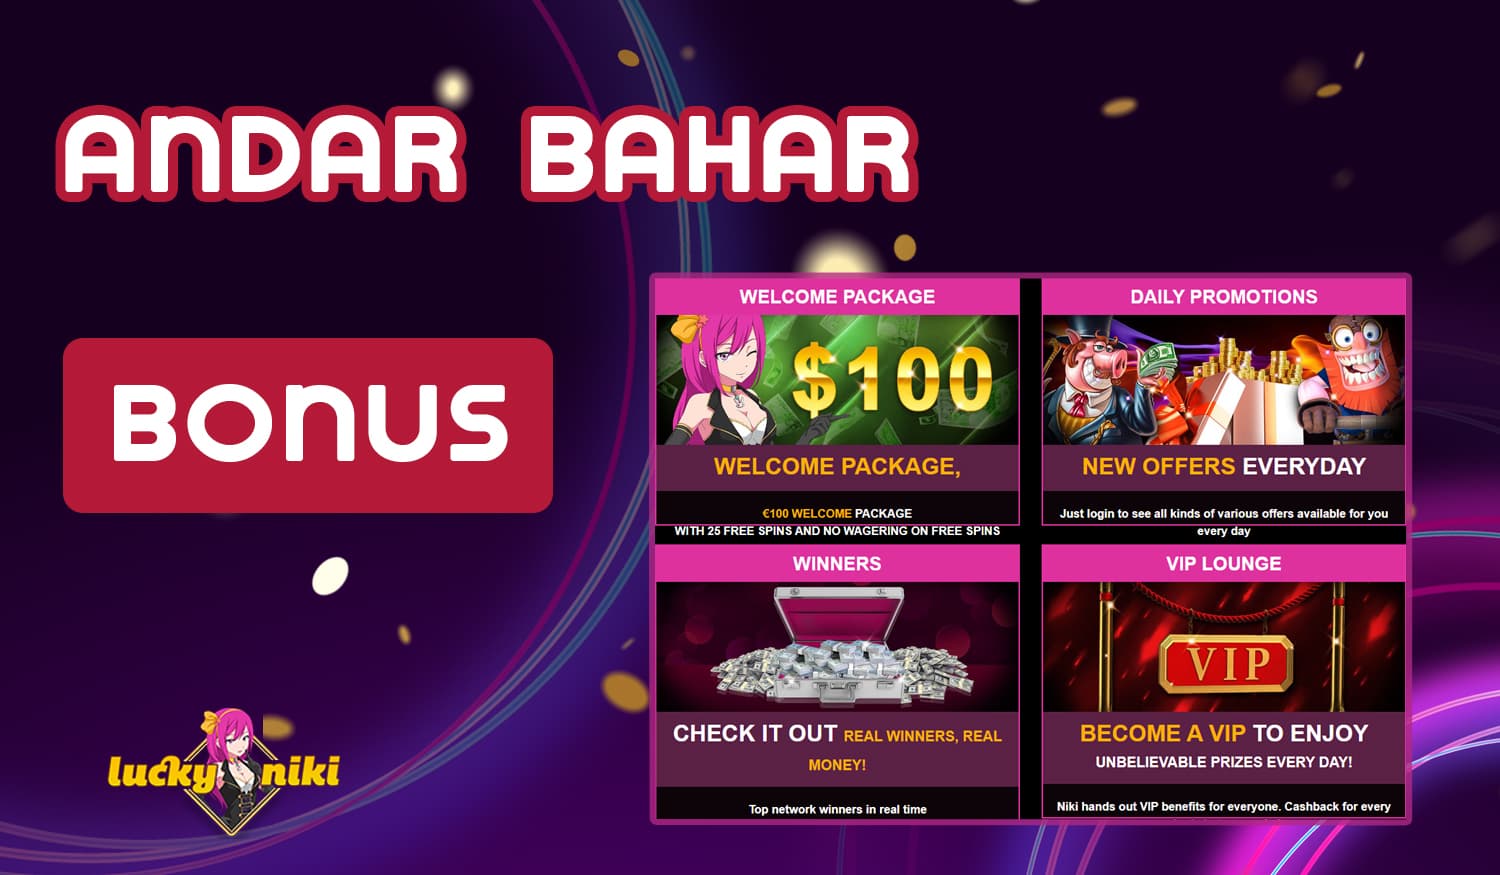 What bonuses fans of online casino and andar bahar games can get on LuckyNiki Casino website